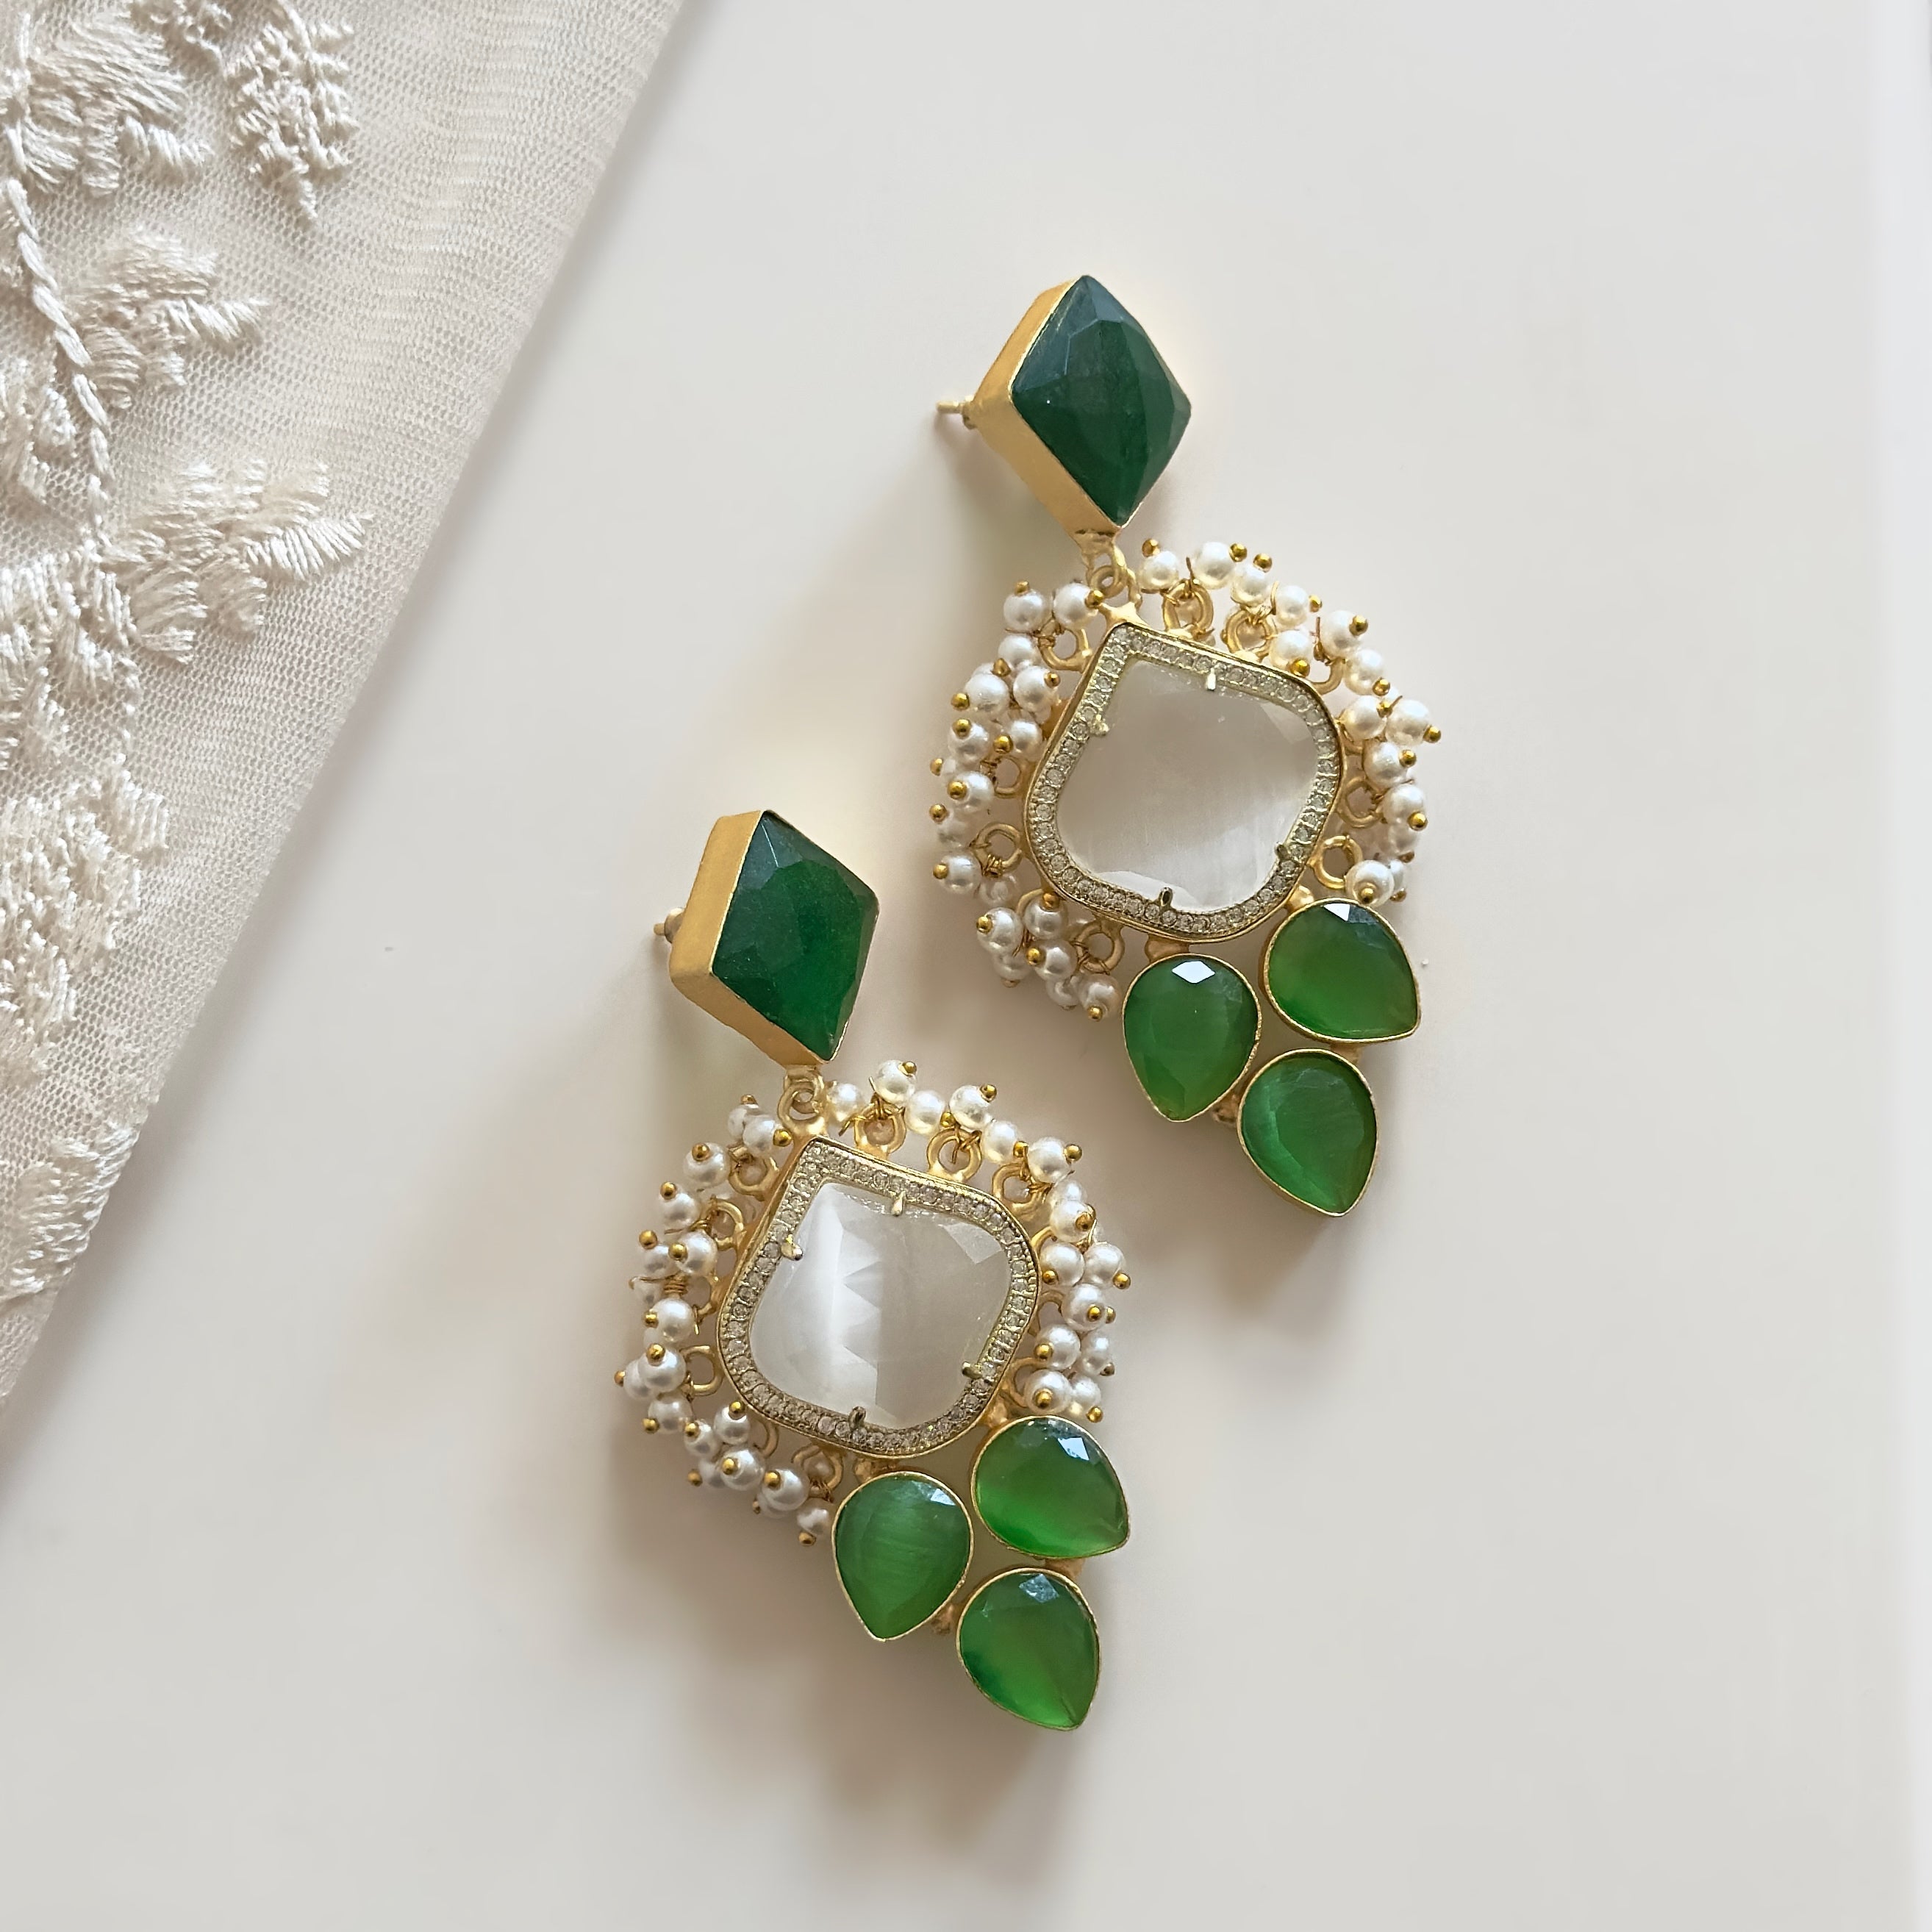 Elevate your style with our Hijra Green Earrings. Crafted with stunning green and grey gemstones, these earrings make a statement that will leave a lasting impression. Perfect for any occasion, these earrings are a must-have for those looking to make a sophisticated yet bold fashion statement.